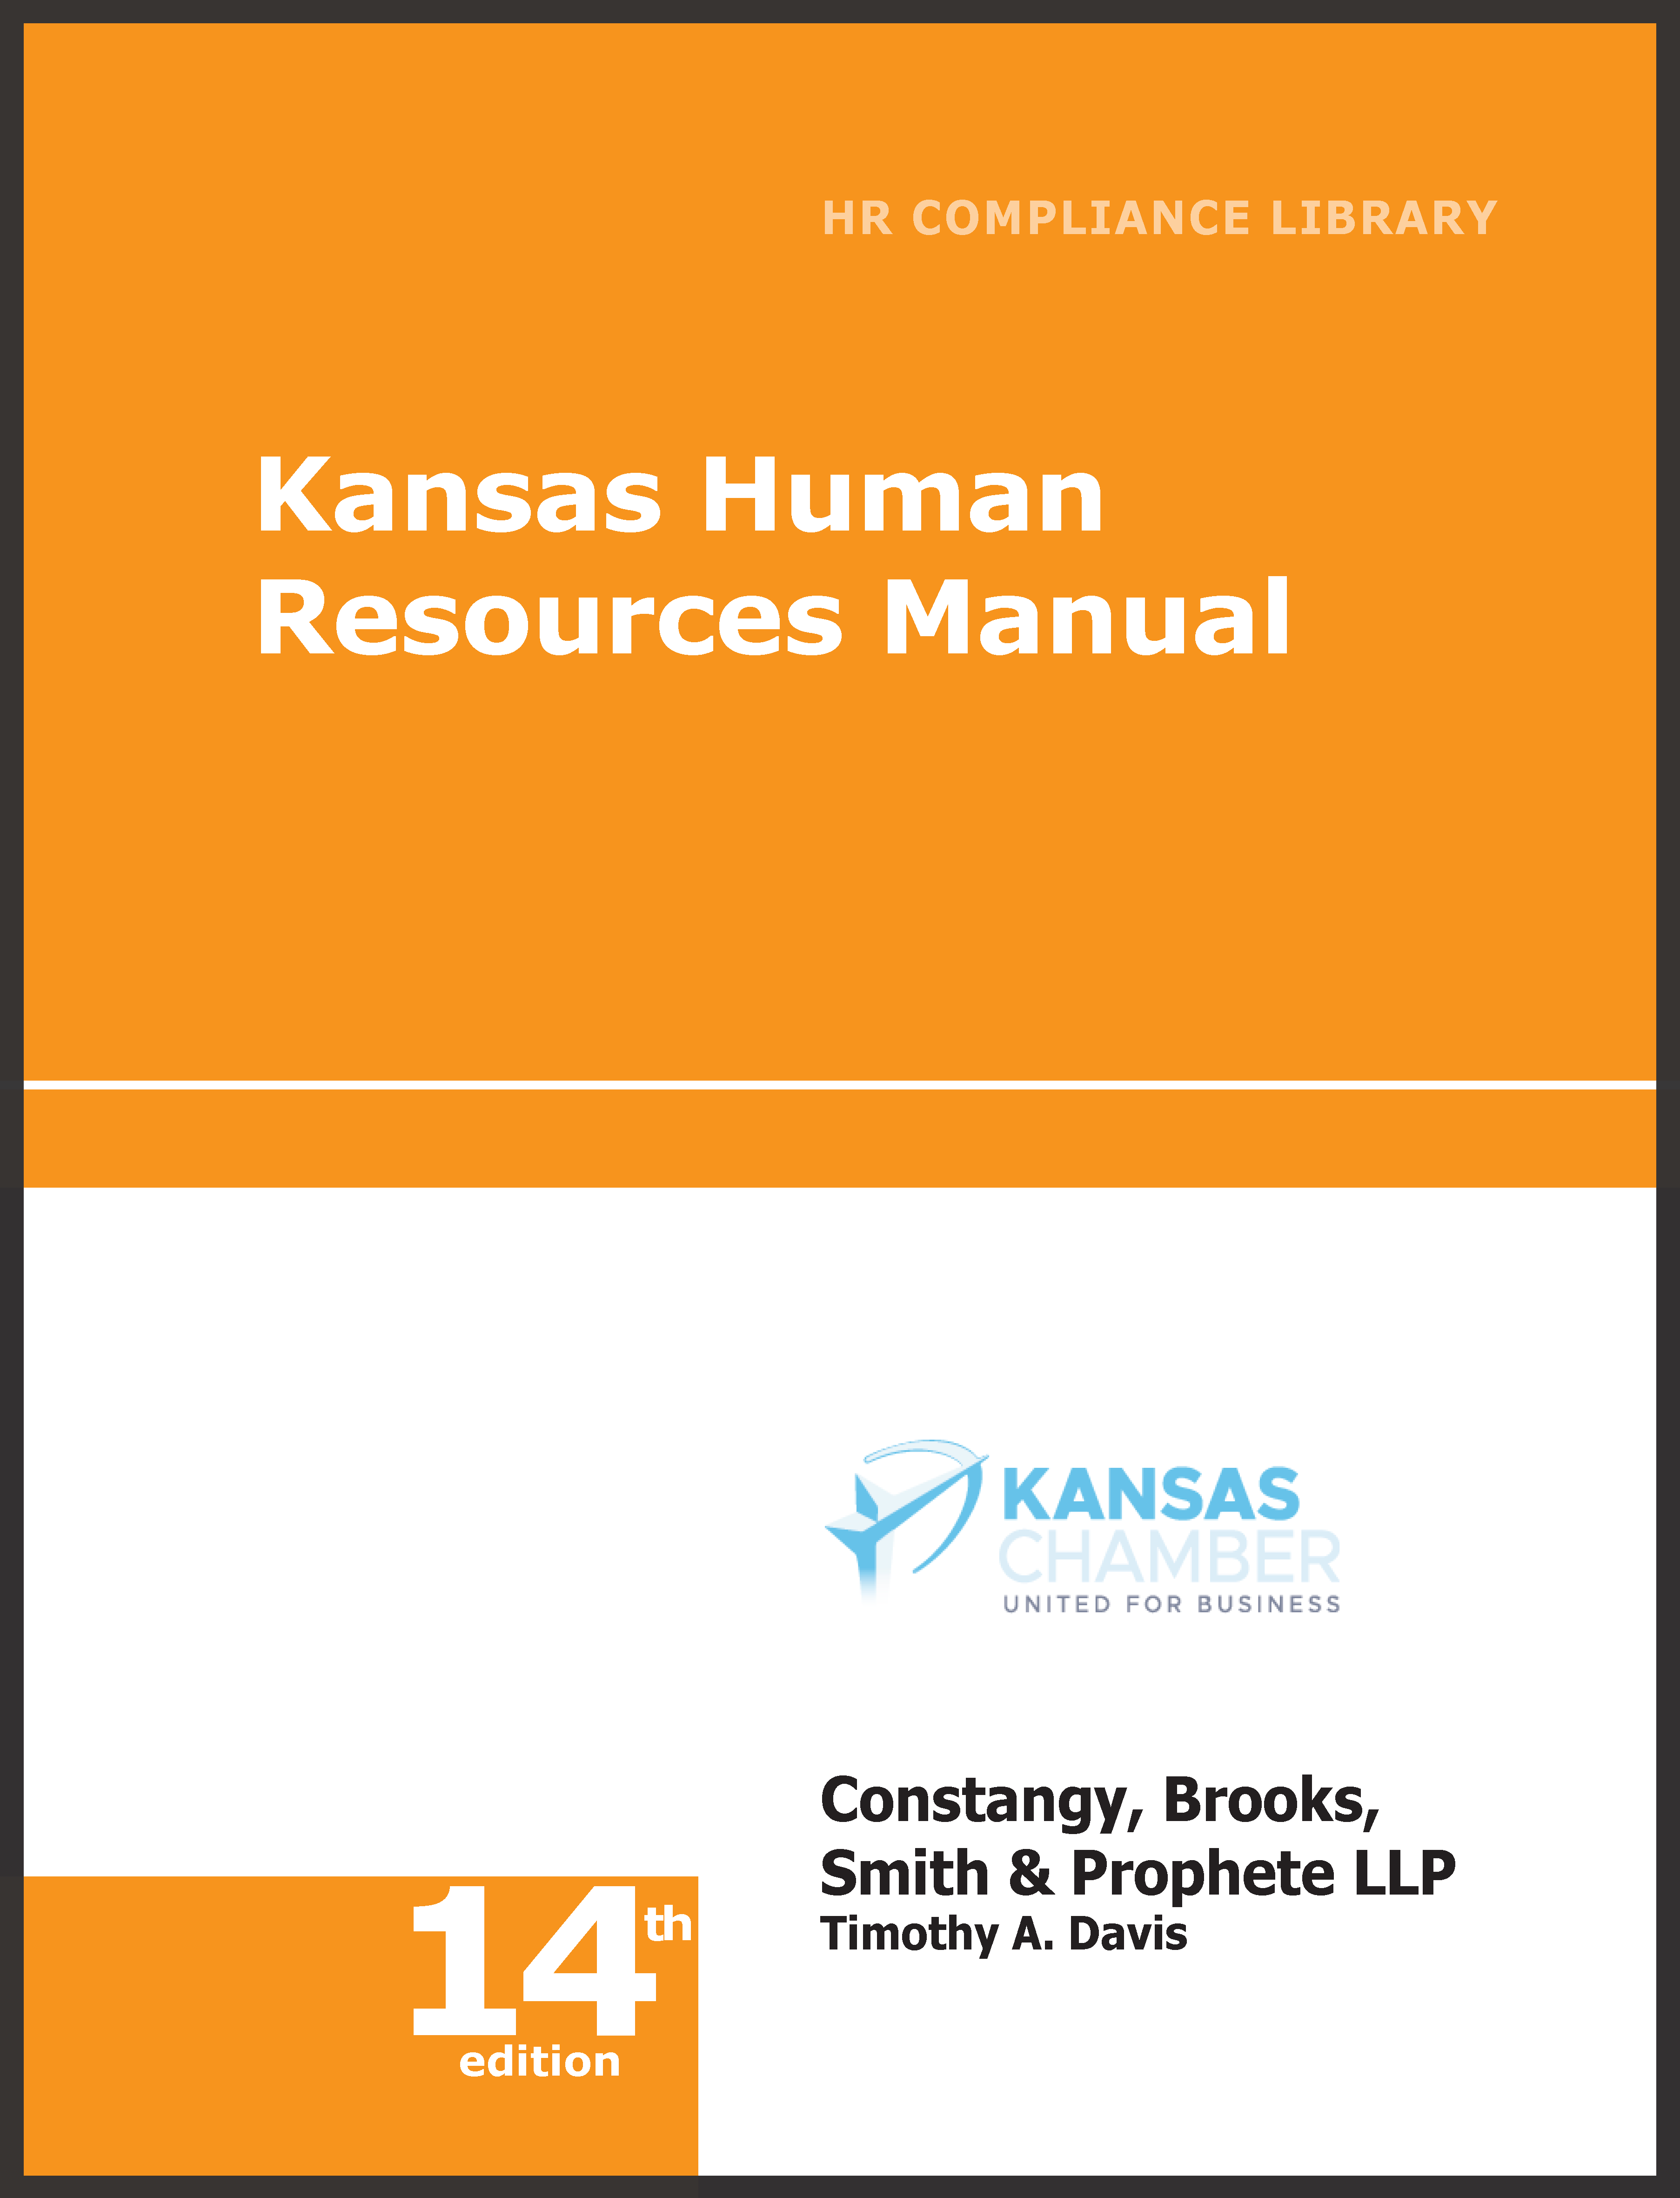 Kansas Human Resources Library—Online Access employment law image, remote work, labor laws, employment laws, right to work, order of protection, minimum wage